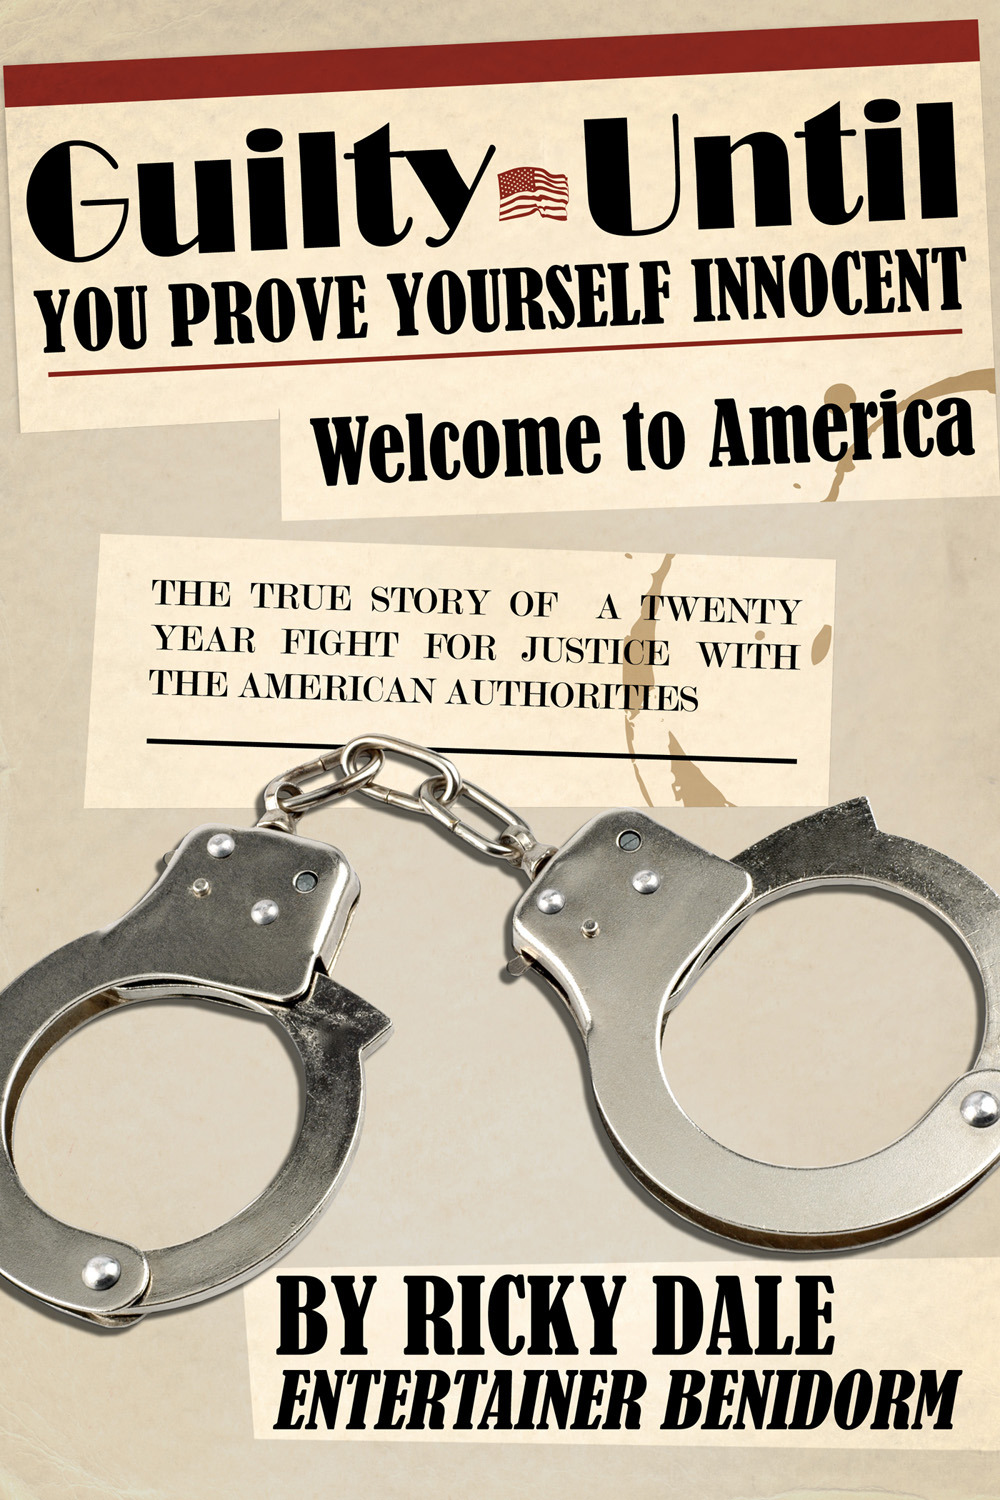 Dale, Ricky - Guilty Until You Prove Yourself Innocent, ebook